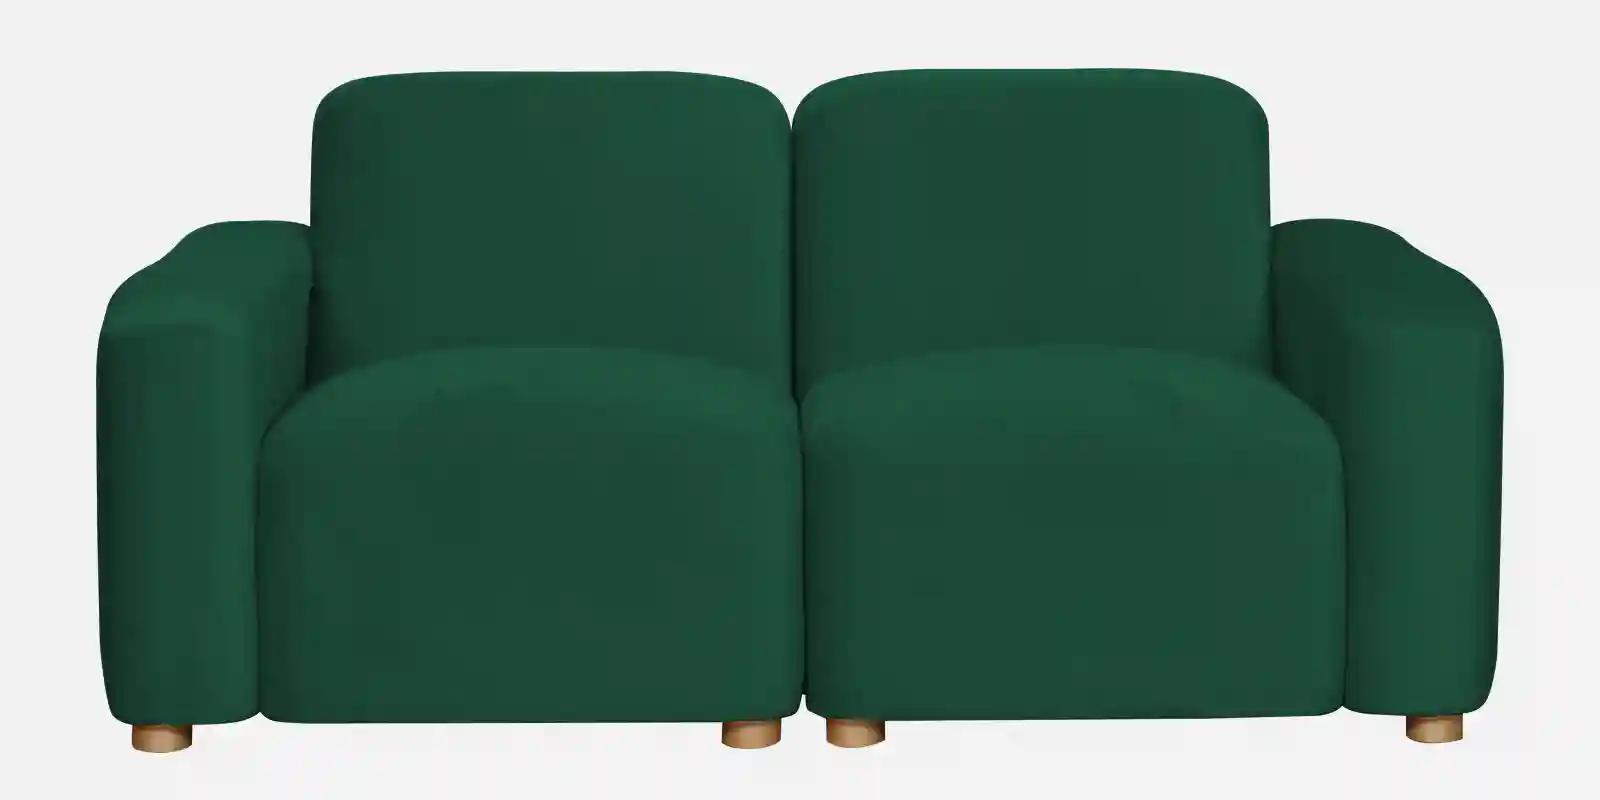 Pine Wood Polyester Fabric Teal Green -2-Seater Sofa